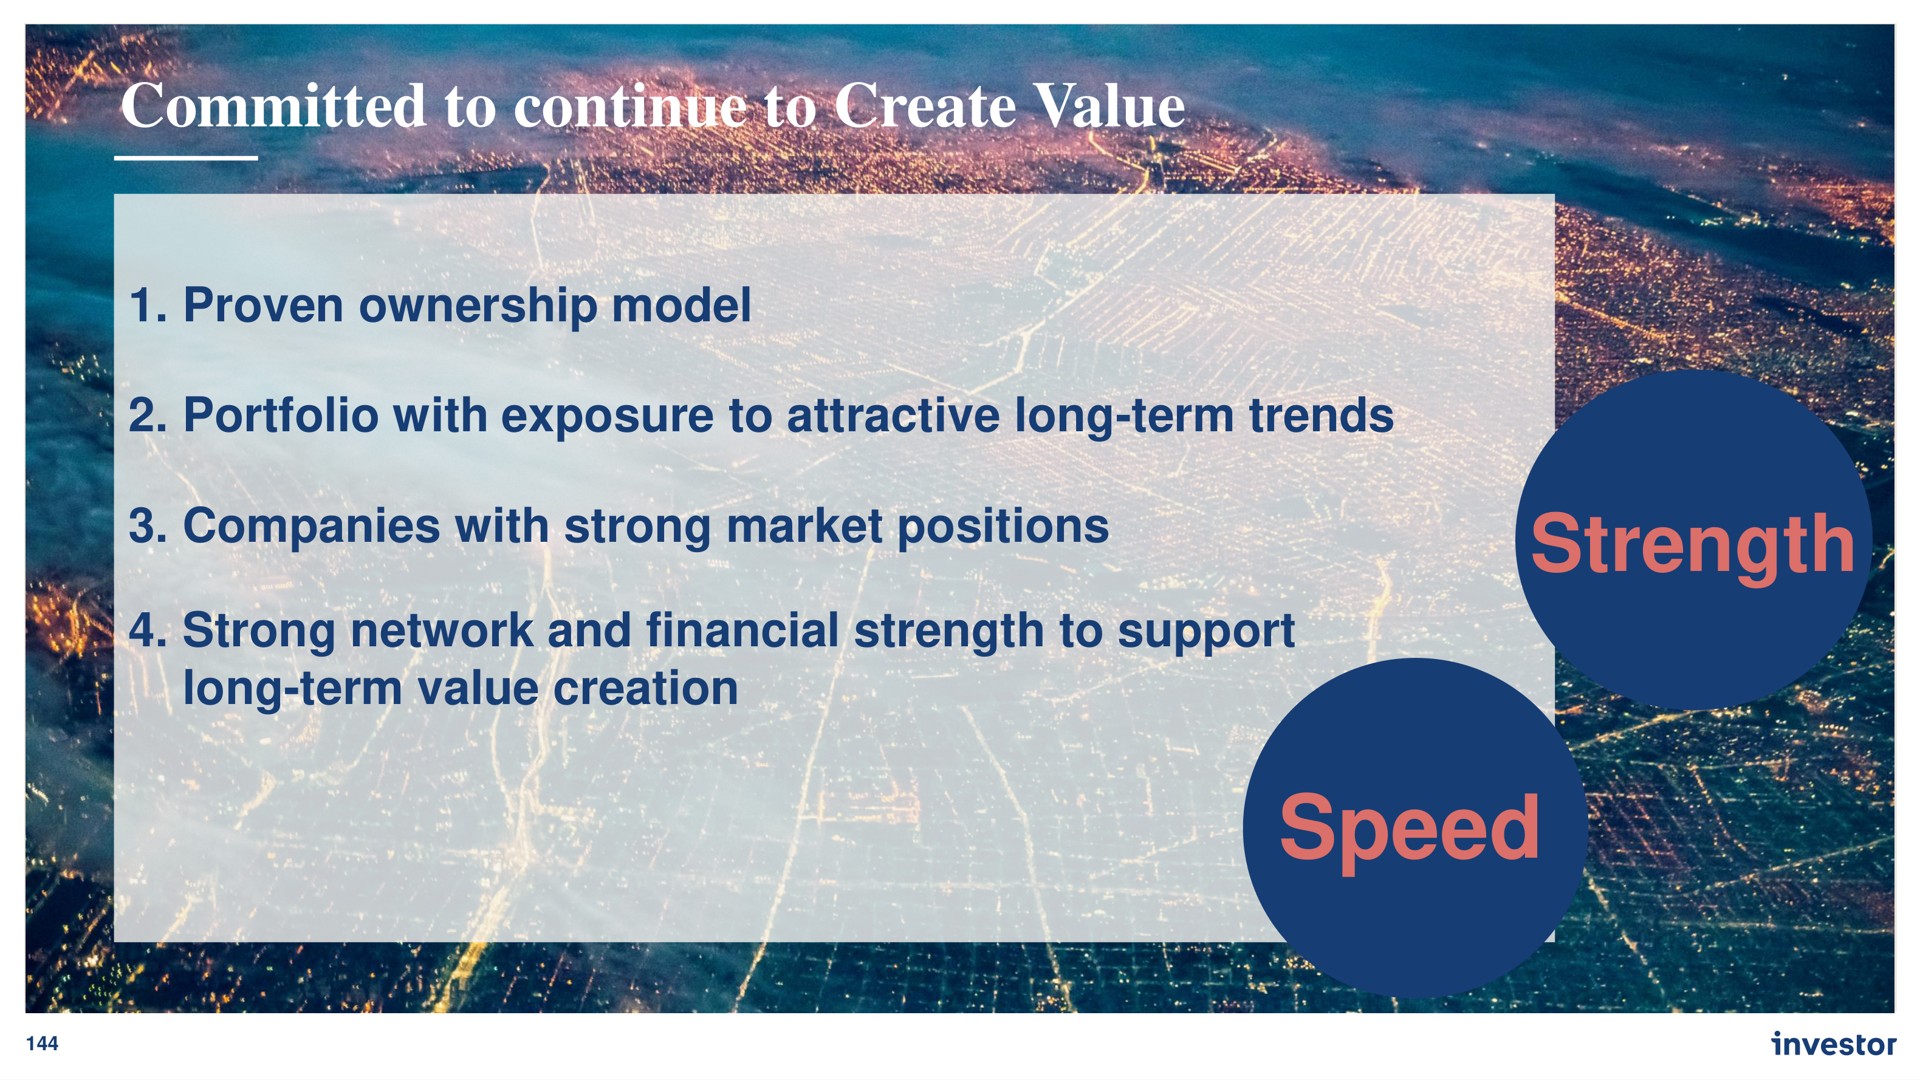 committed to continue to create value strength speed proven ownership model portfolio with exposure attractive long term trends companies with strong market positions a strong network and financial support long term creation | Investor AB